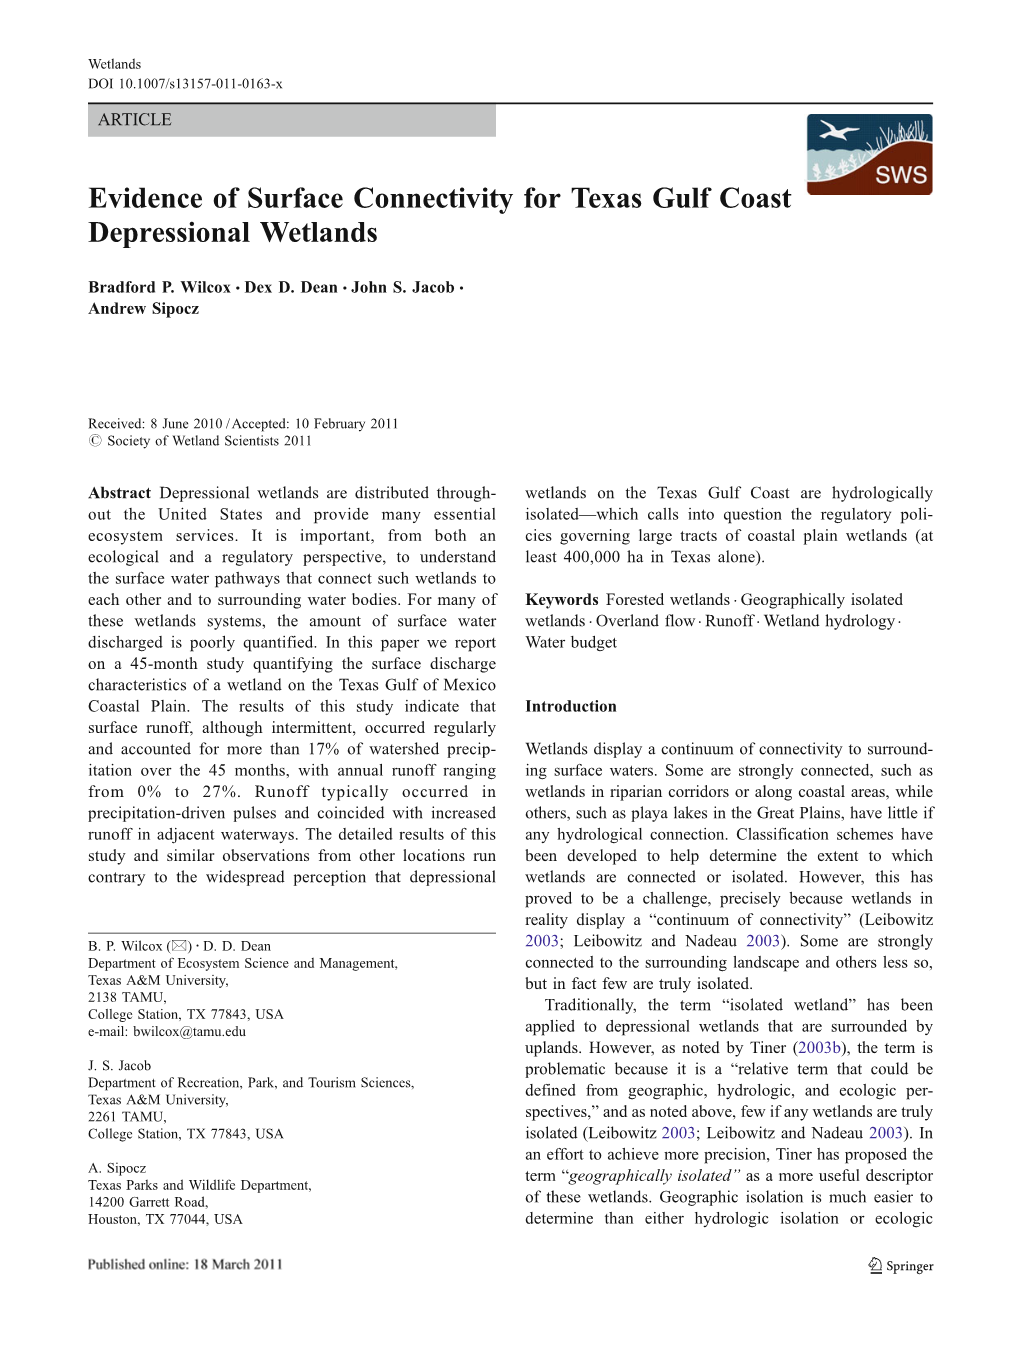 Evidence of Surface Connectivity for Texas Gulf Coast Depressional Wetlands